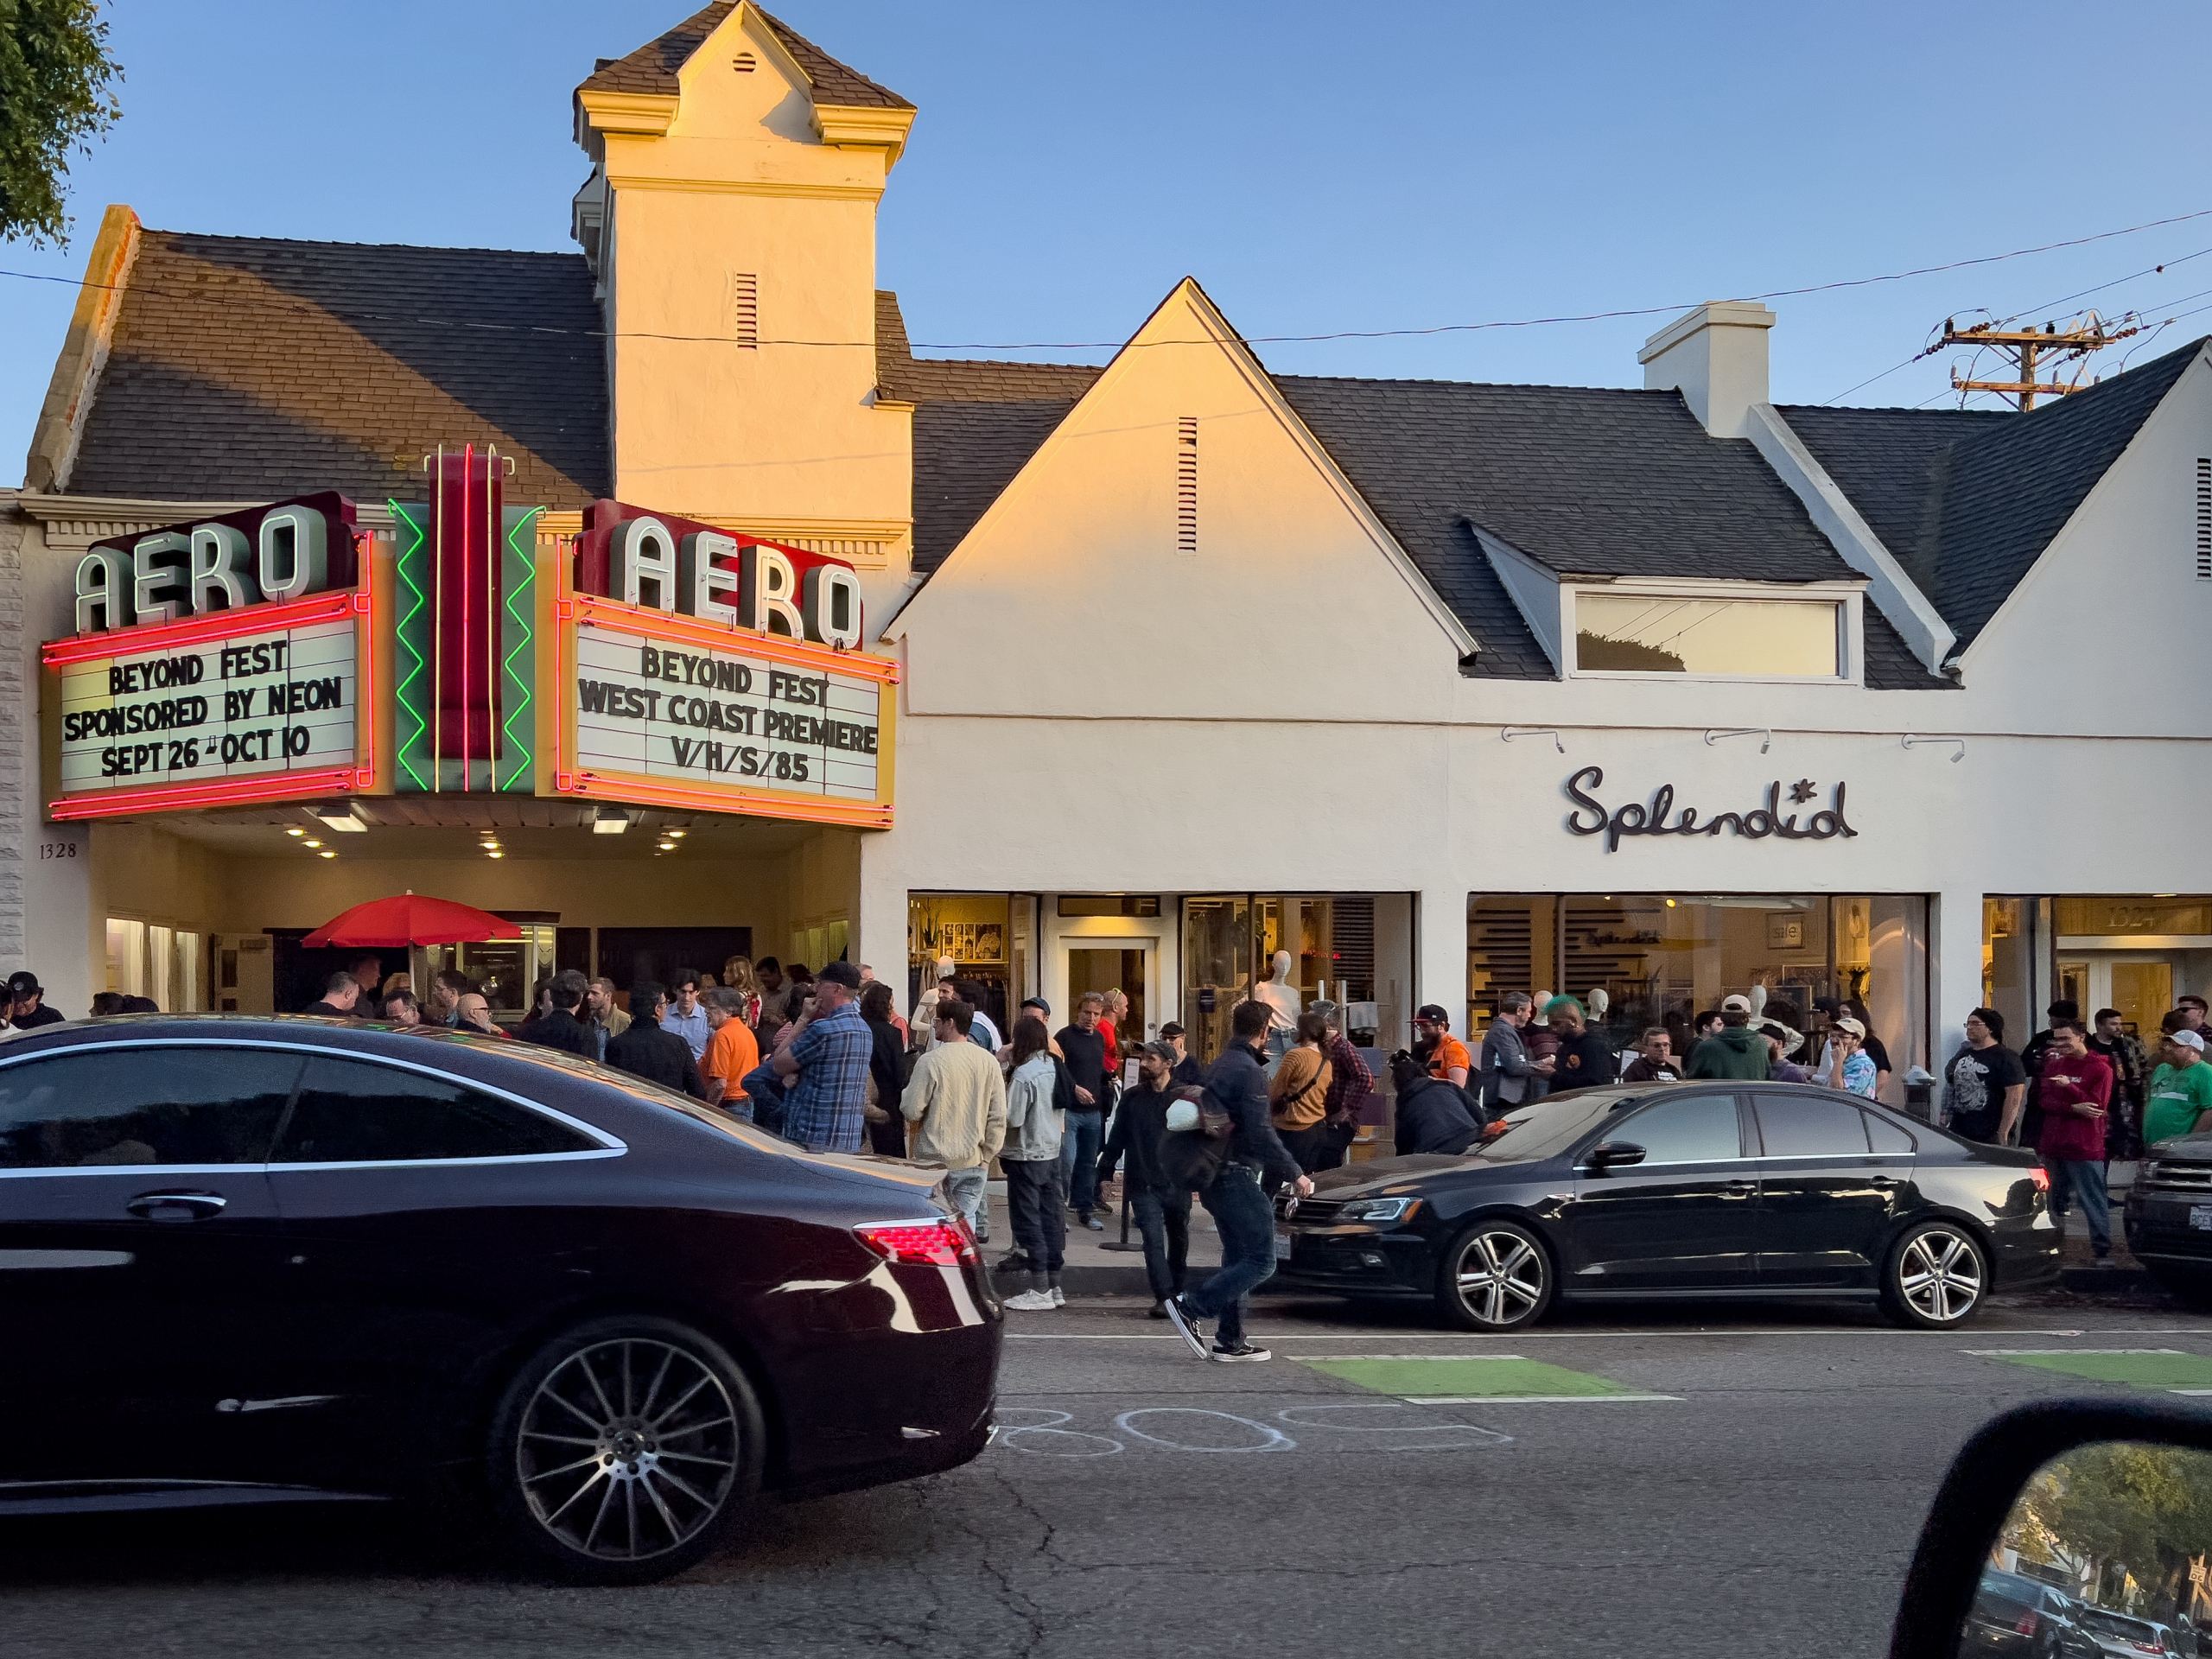 Sunset at the Aero Theater in Santa Monica with a large line of people waiting to see VHS85